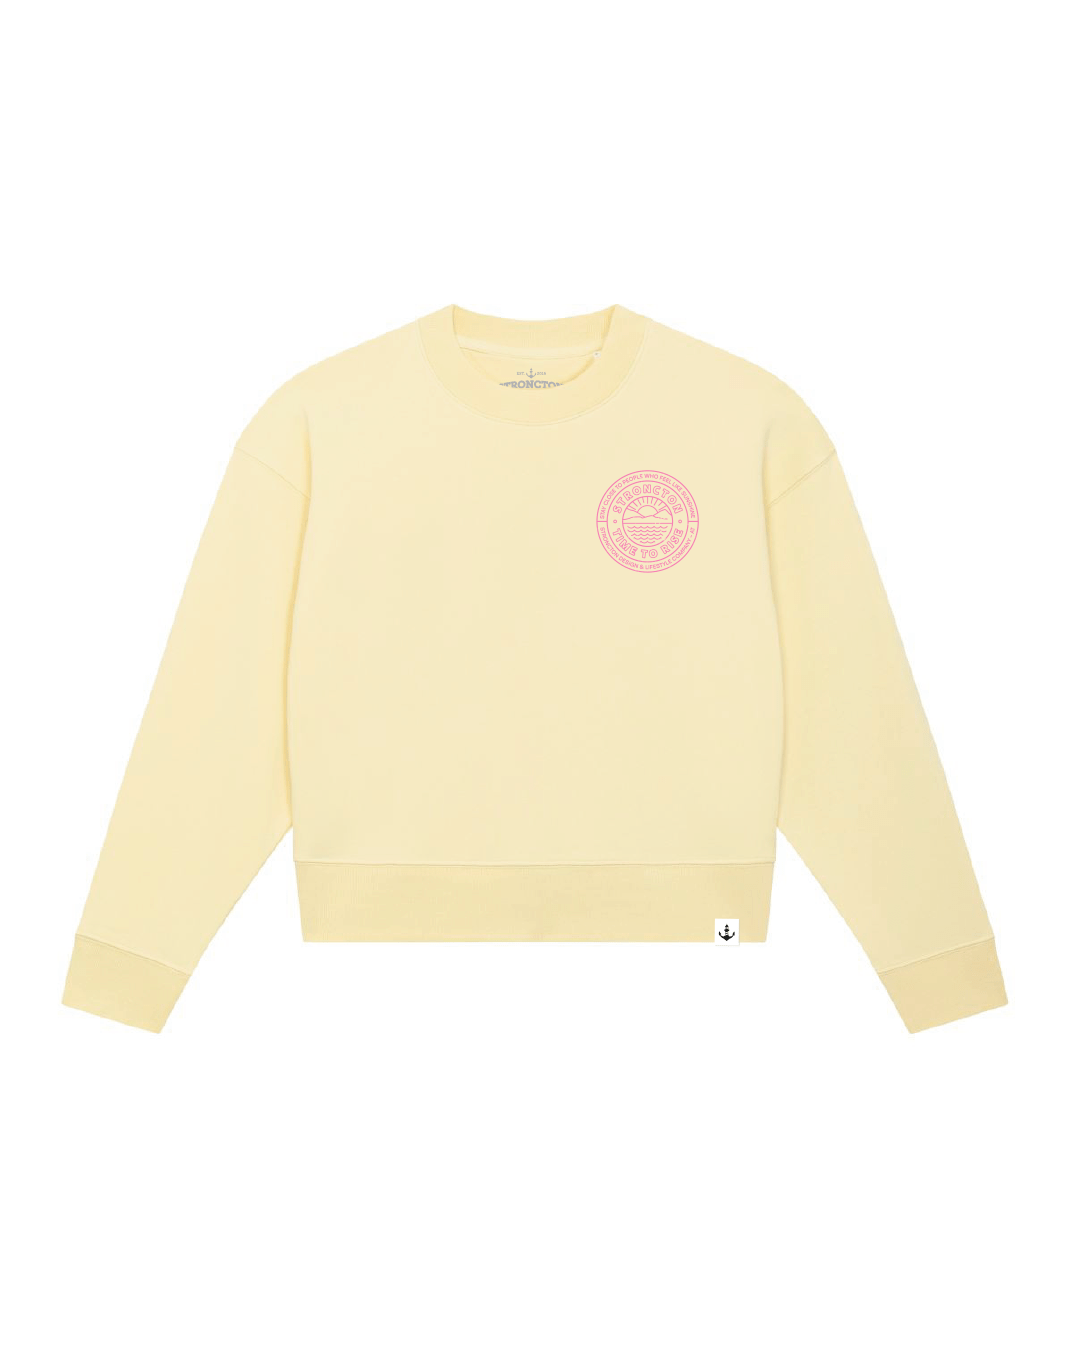 Time To Rise Cropped Crewneck - Butter